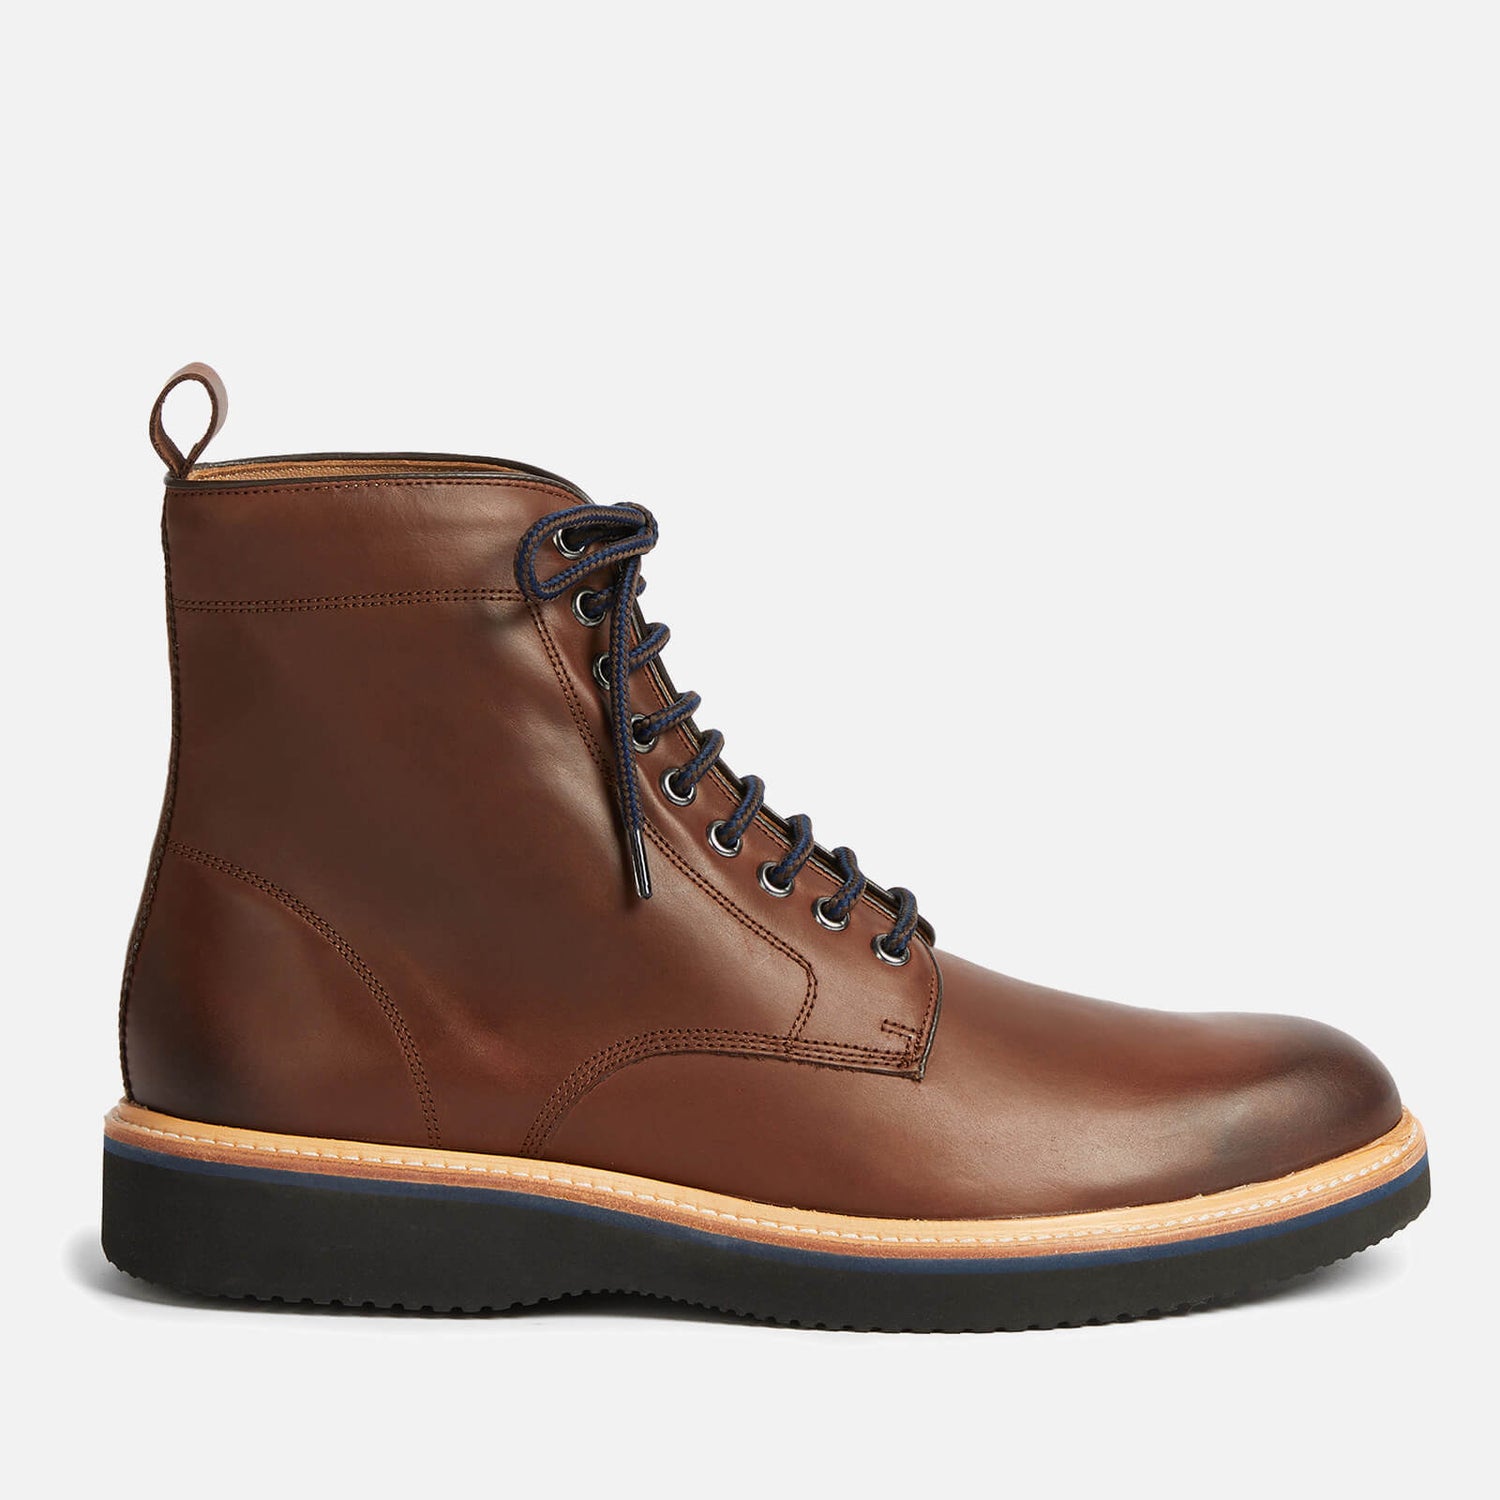 Ted Baker Men's Linton Leather Lace Up Boots - Brown - UK 7